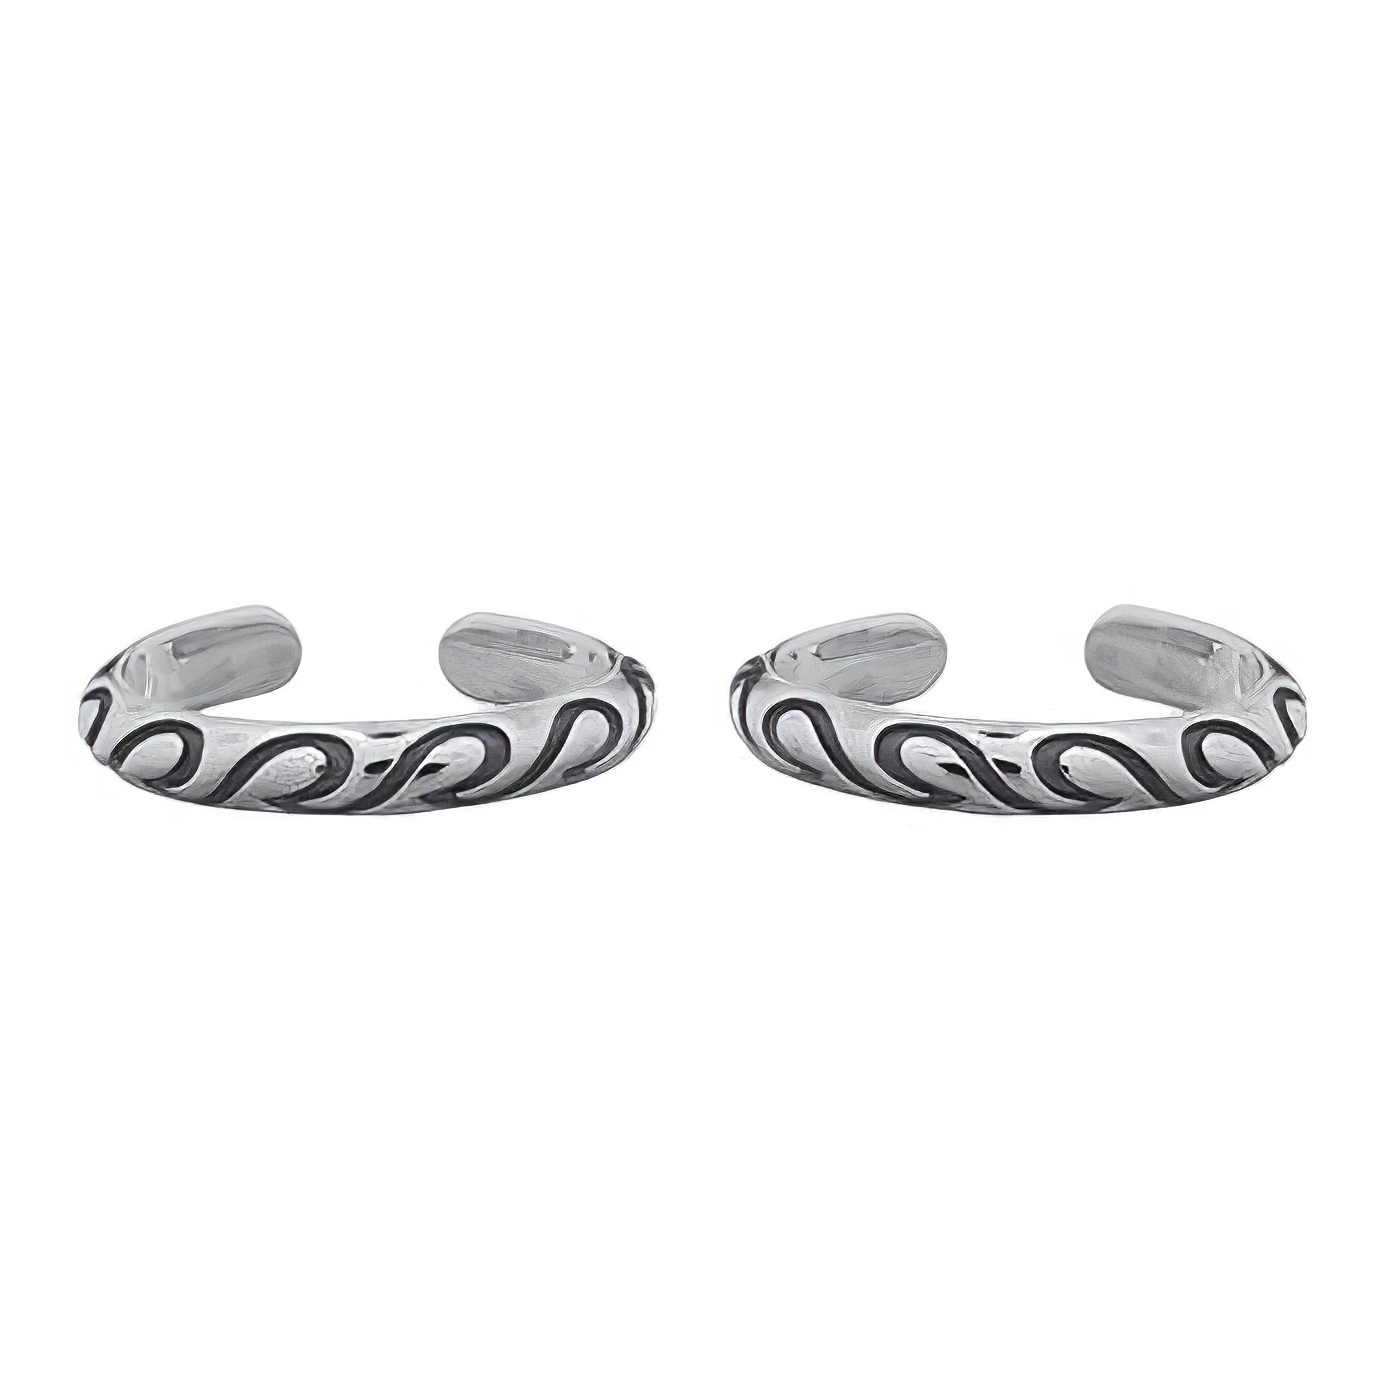 Link Of Waves On Sterling 925 Silver Cuff Earrings by BeYindi 